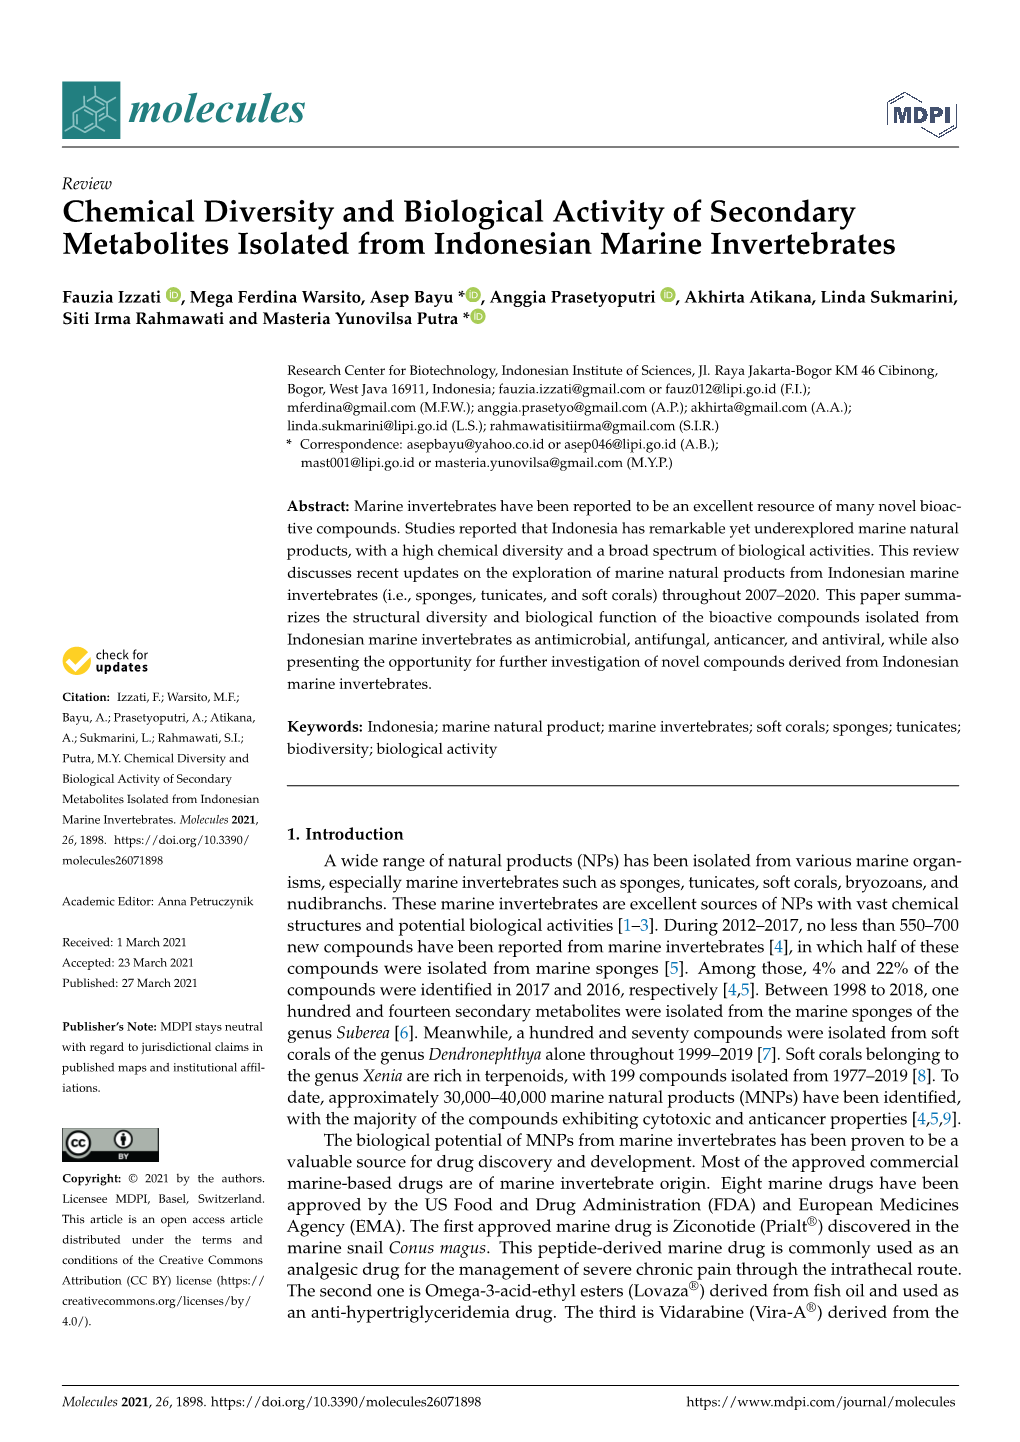 Chemical Diversity and Biological Activity of Secondary Metabolites Isolated from Indonesian Marine Invertebrates